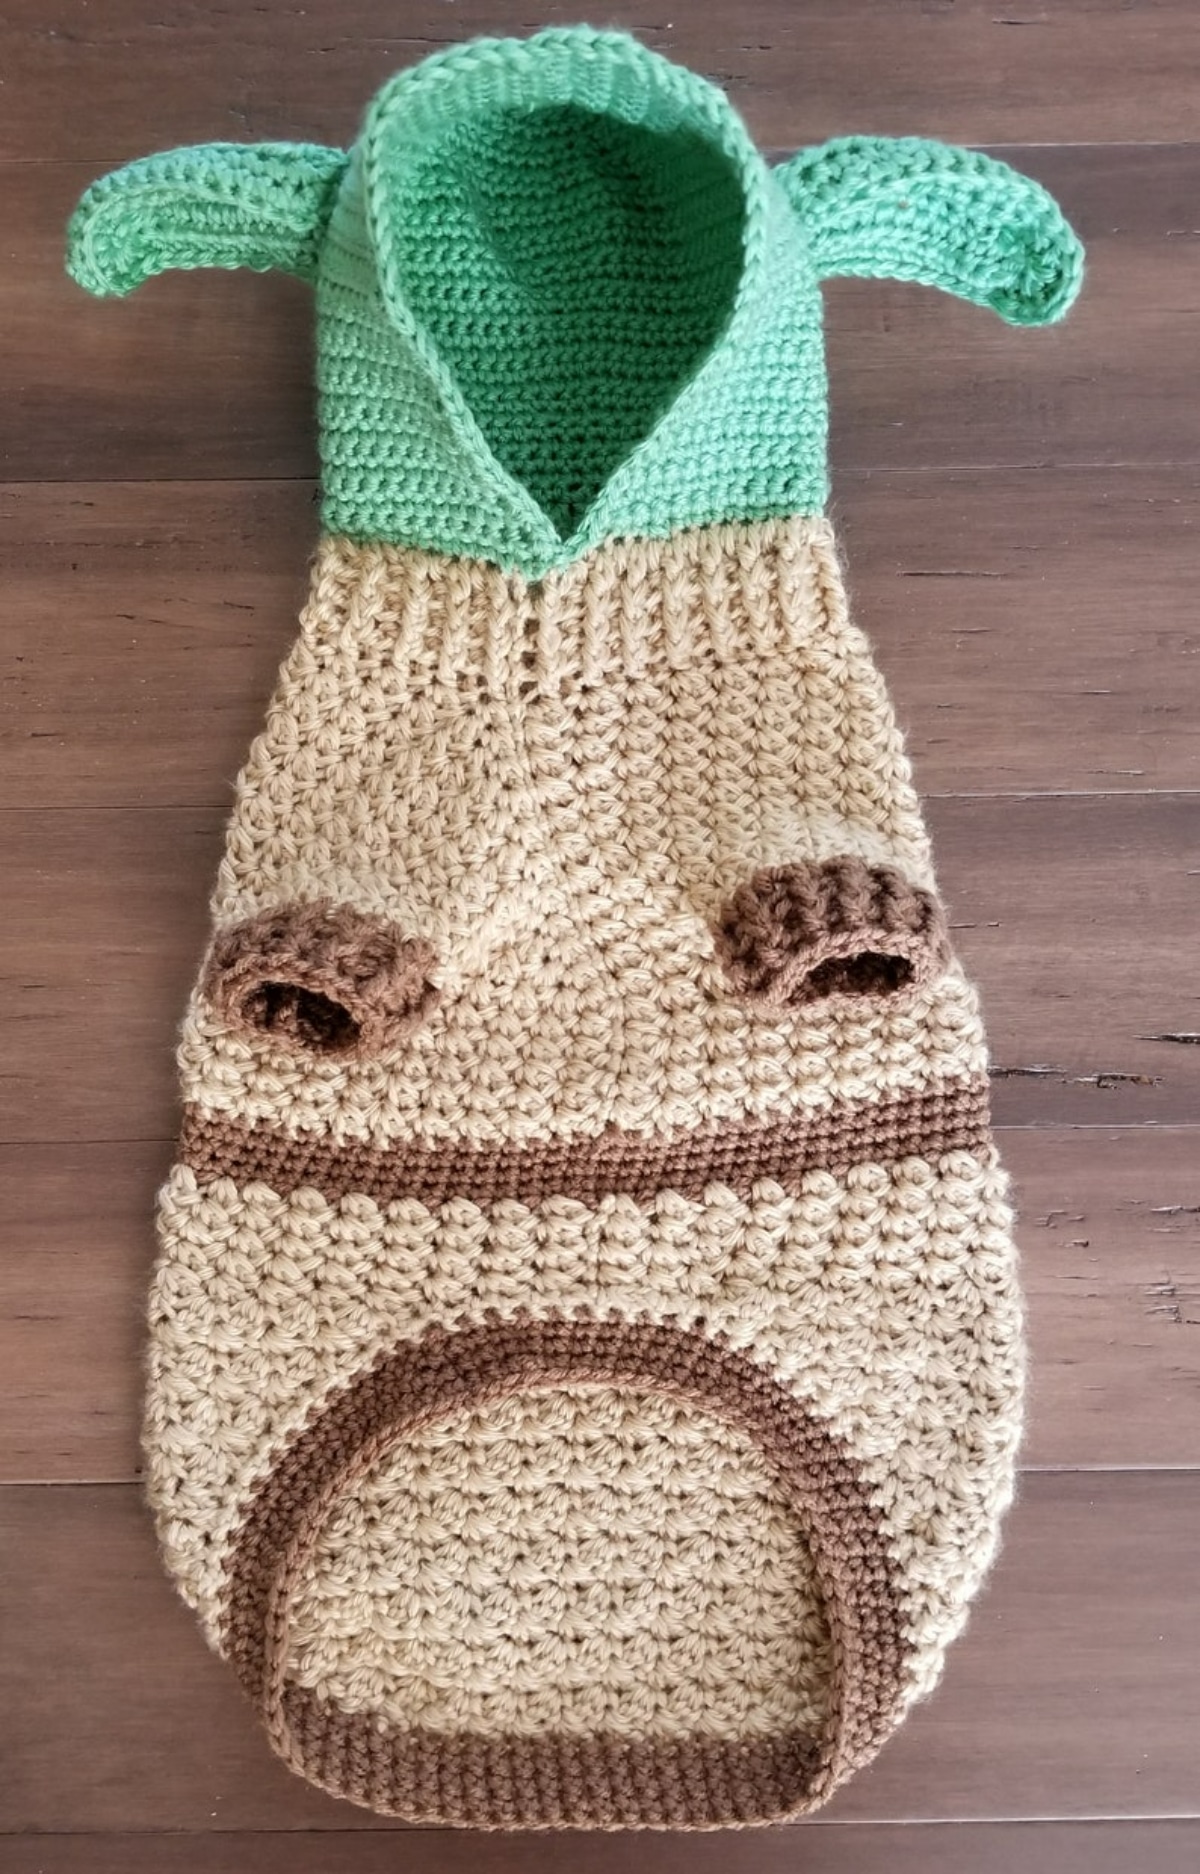 A green and brown crochet dog sweater with a green hood with ears, and dark brown cuffs around the legs on a wooden floor.